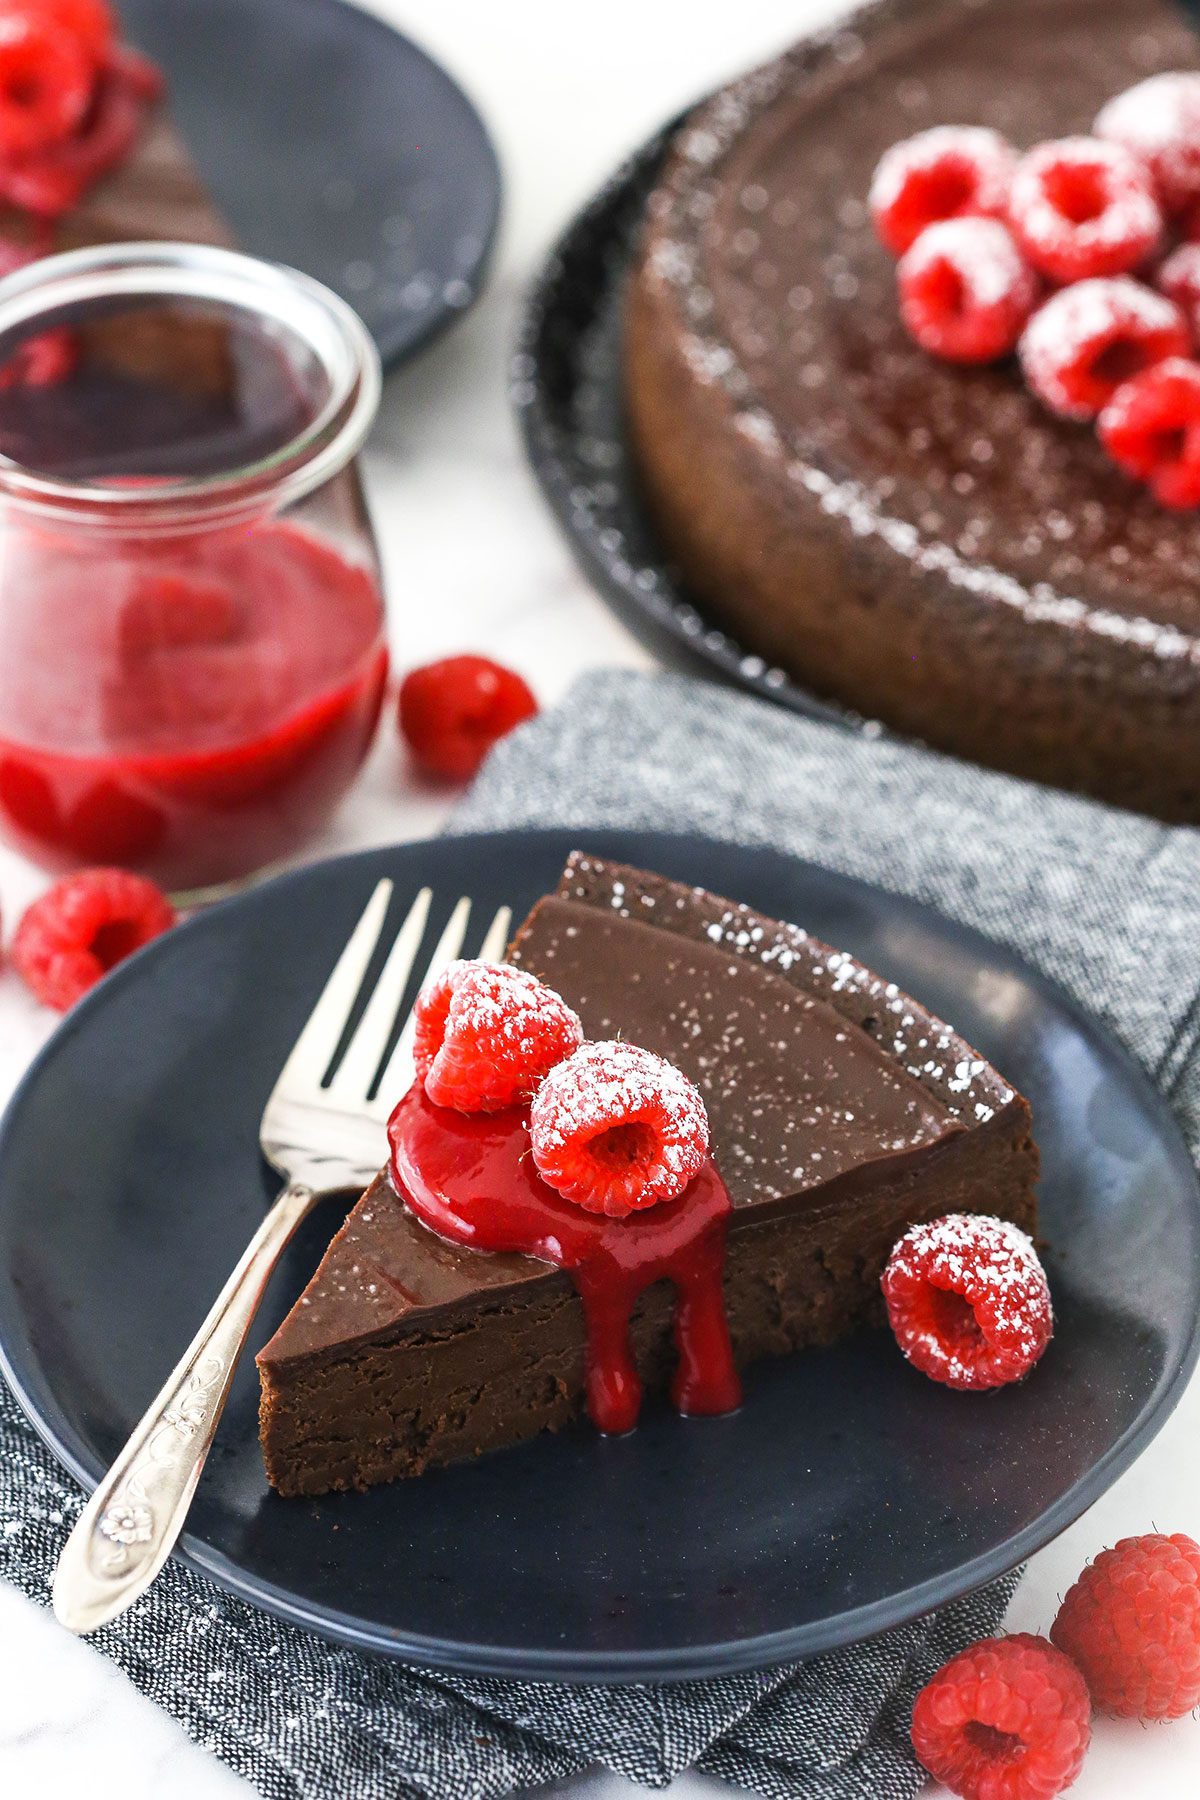 A slice of chocolate torte on a plate with raspberry sauce and the remaining cake in the background